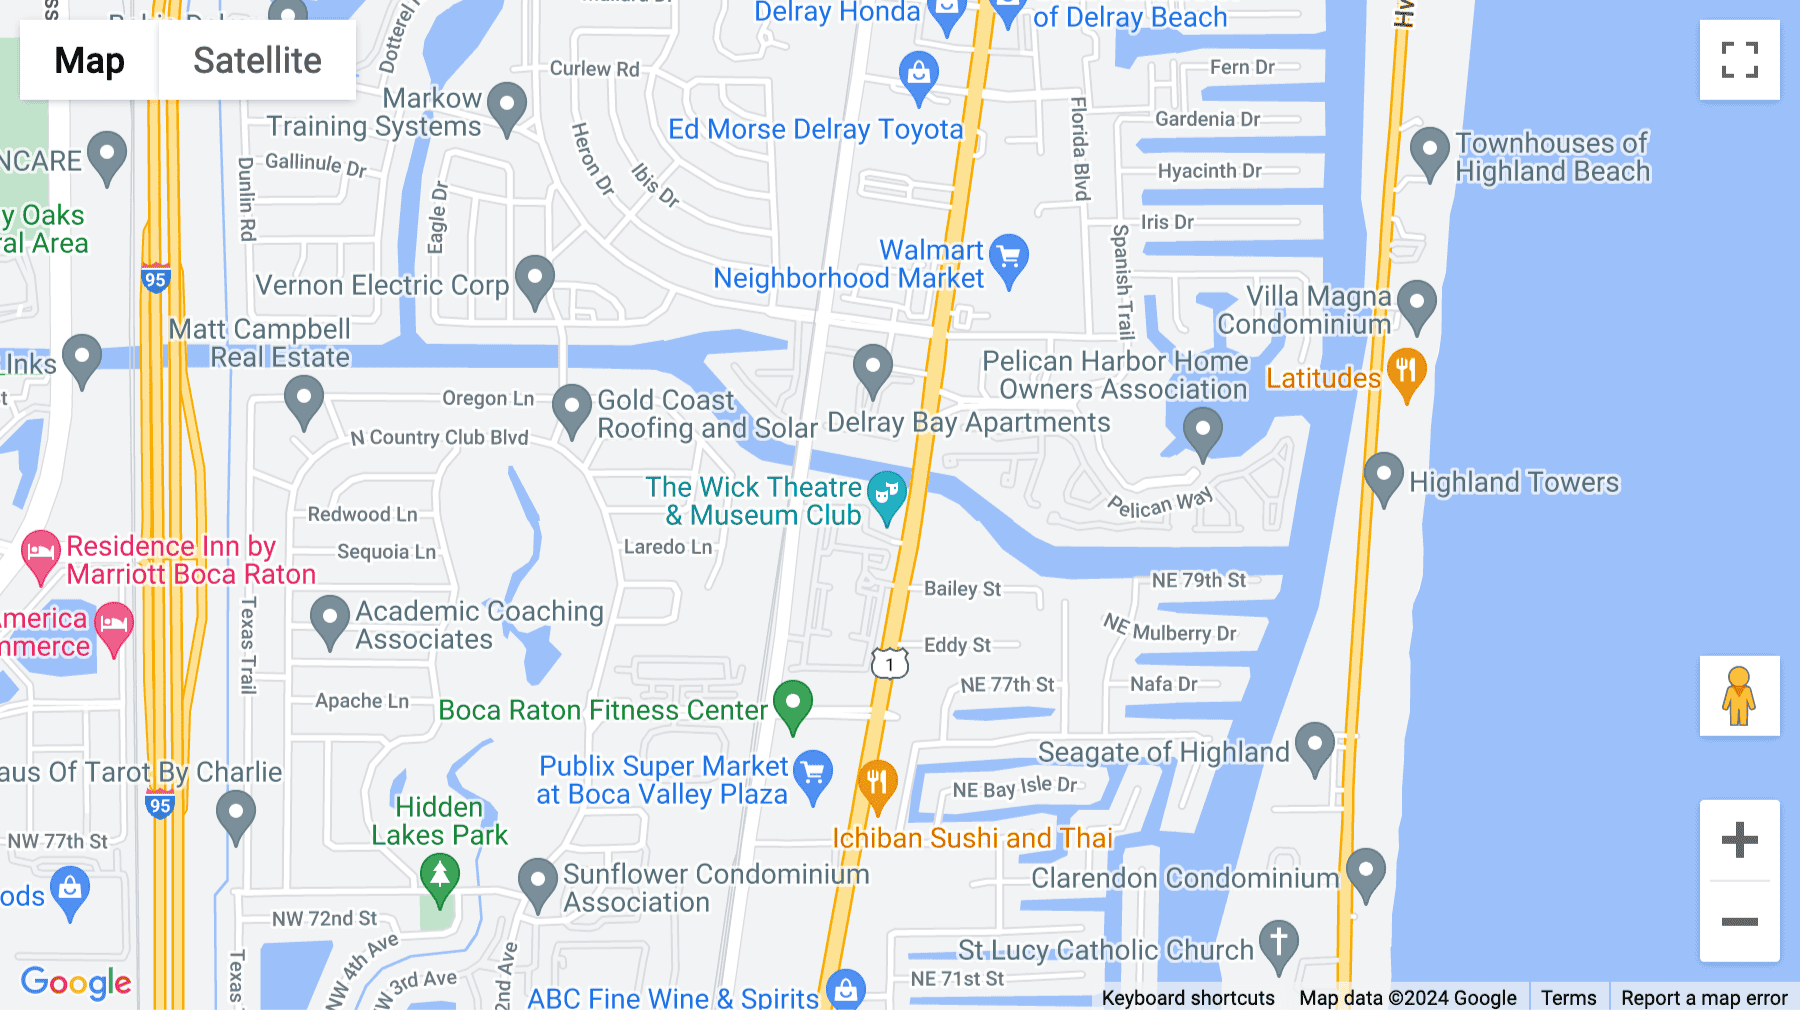 Click for interative map of 7999 North Federal Highway, 4th Floor, Delray Beach